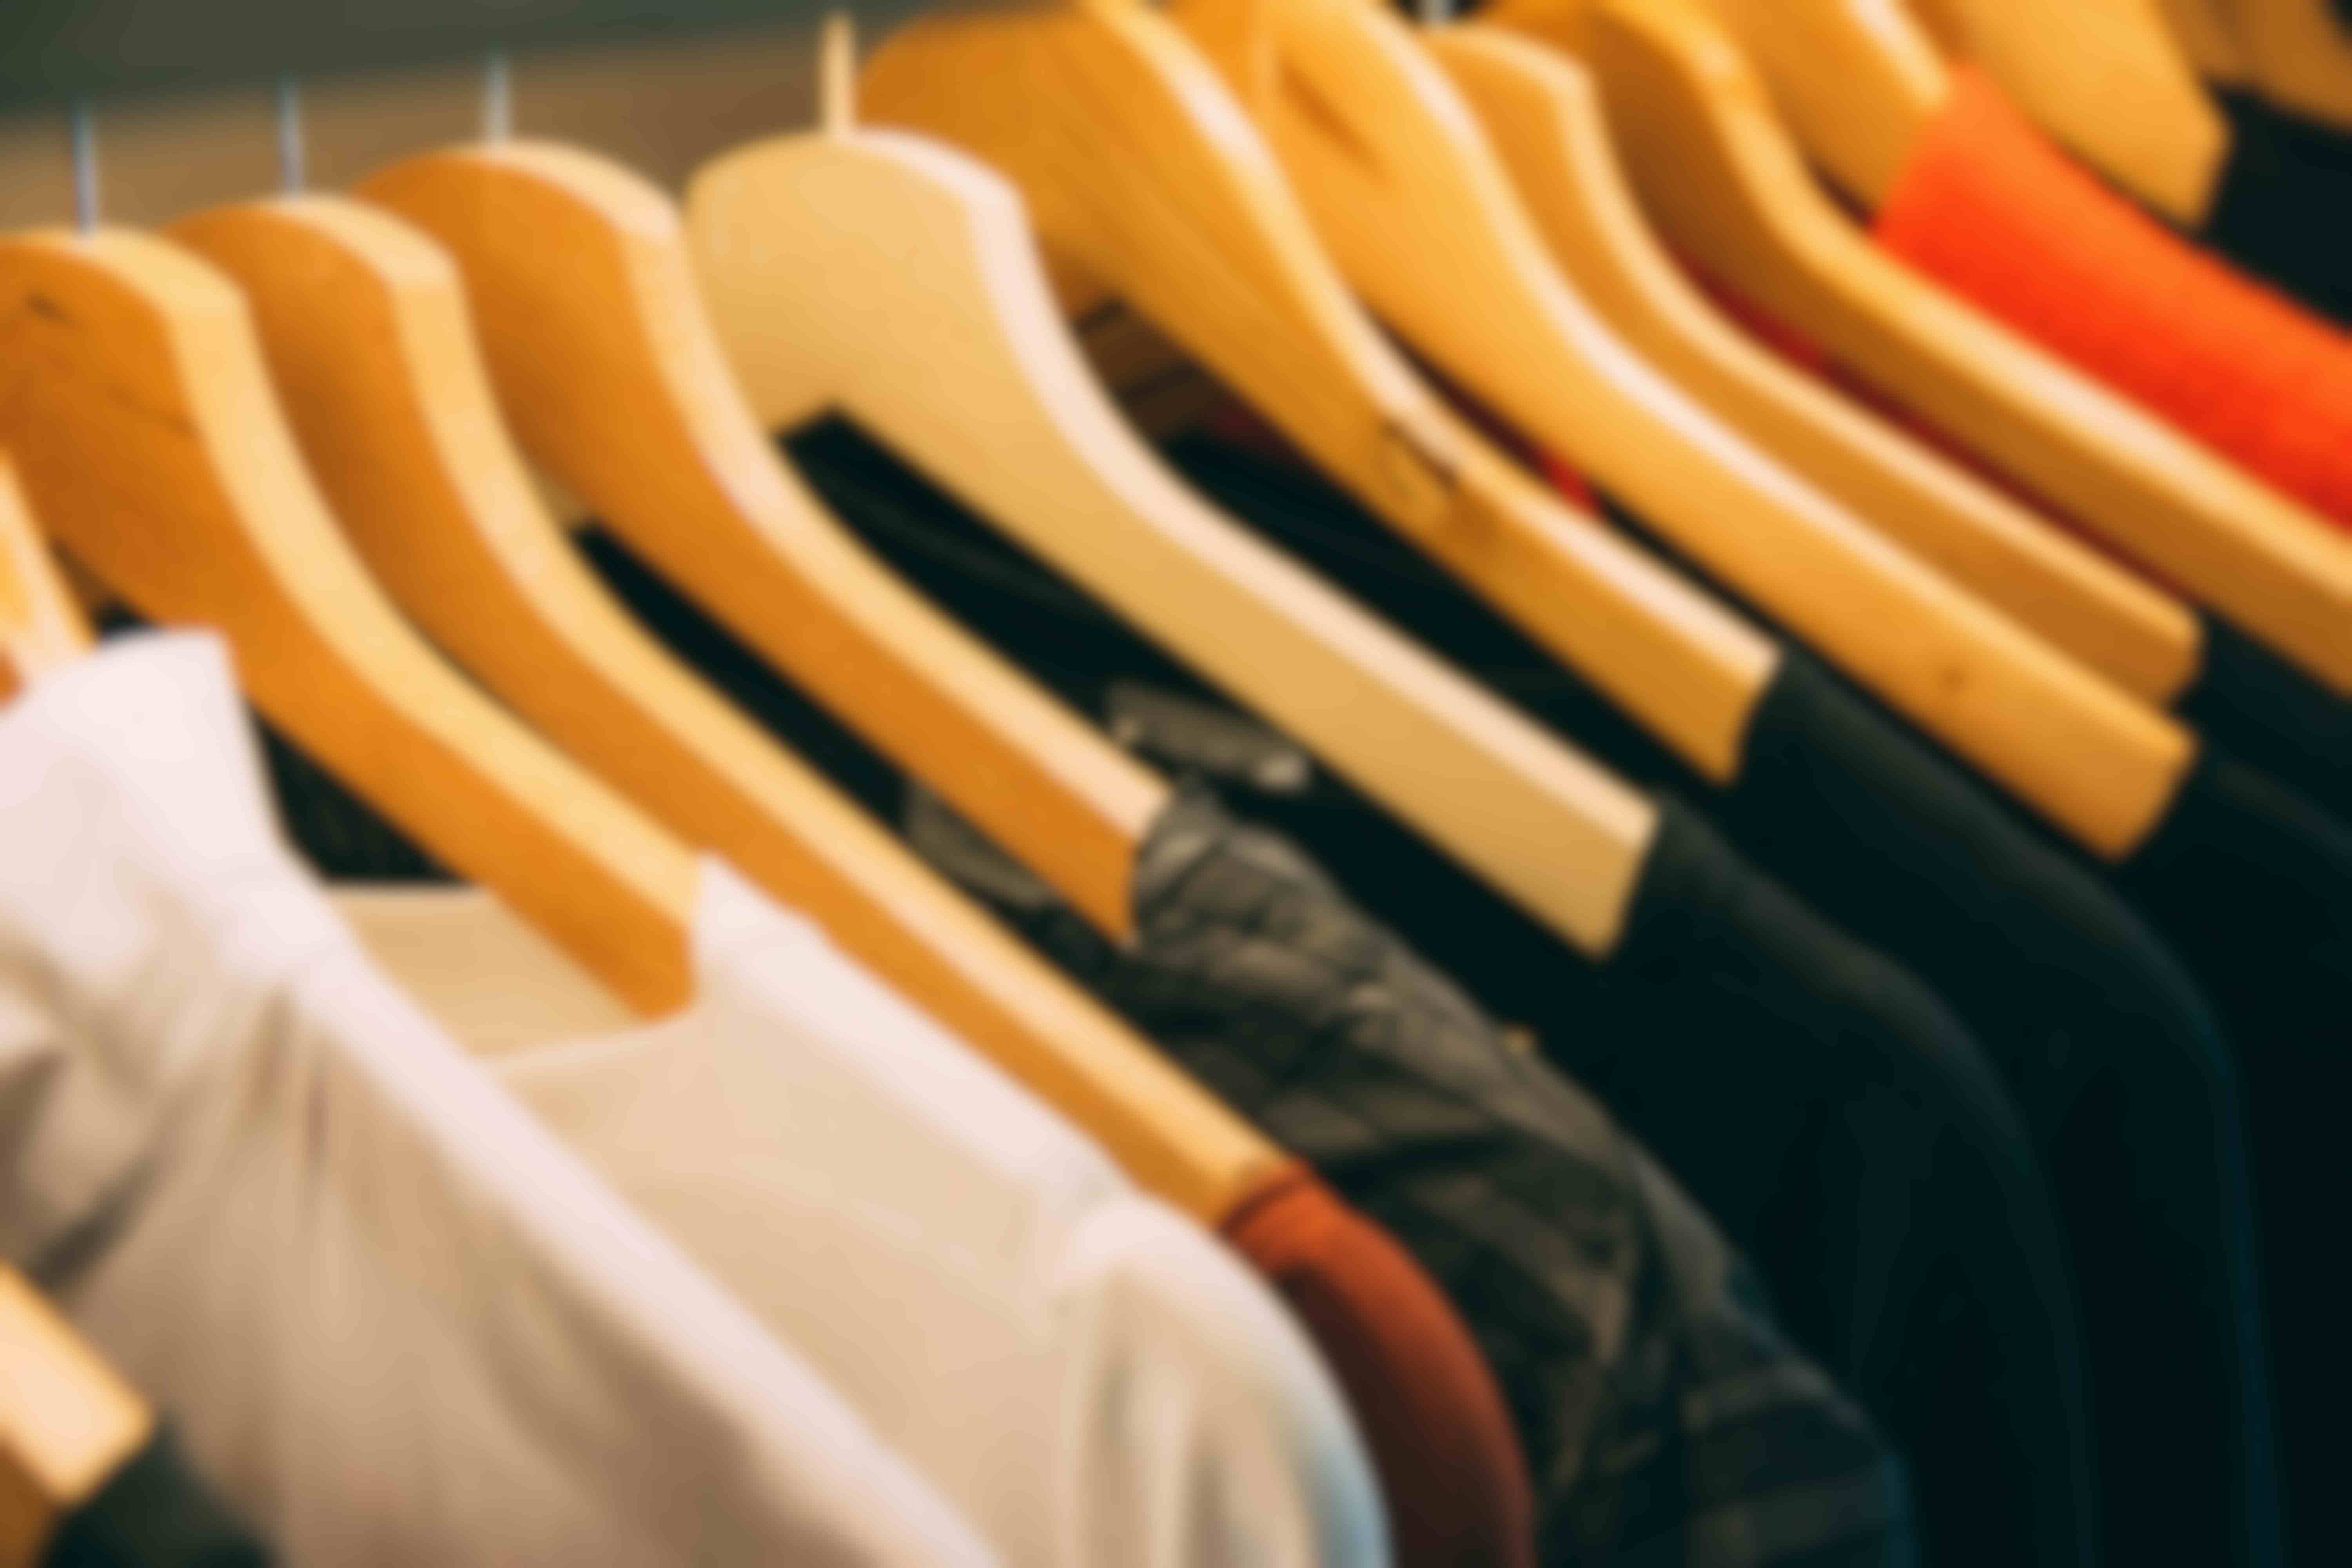  Volunteer for clothing and household goods Sorting center